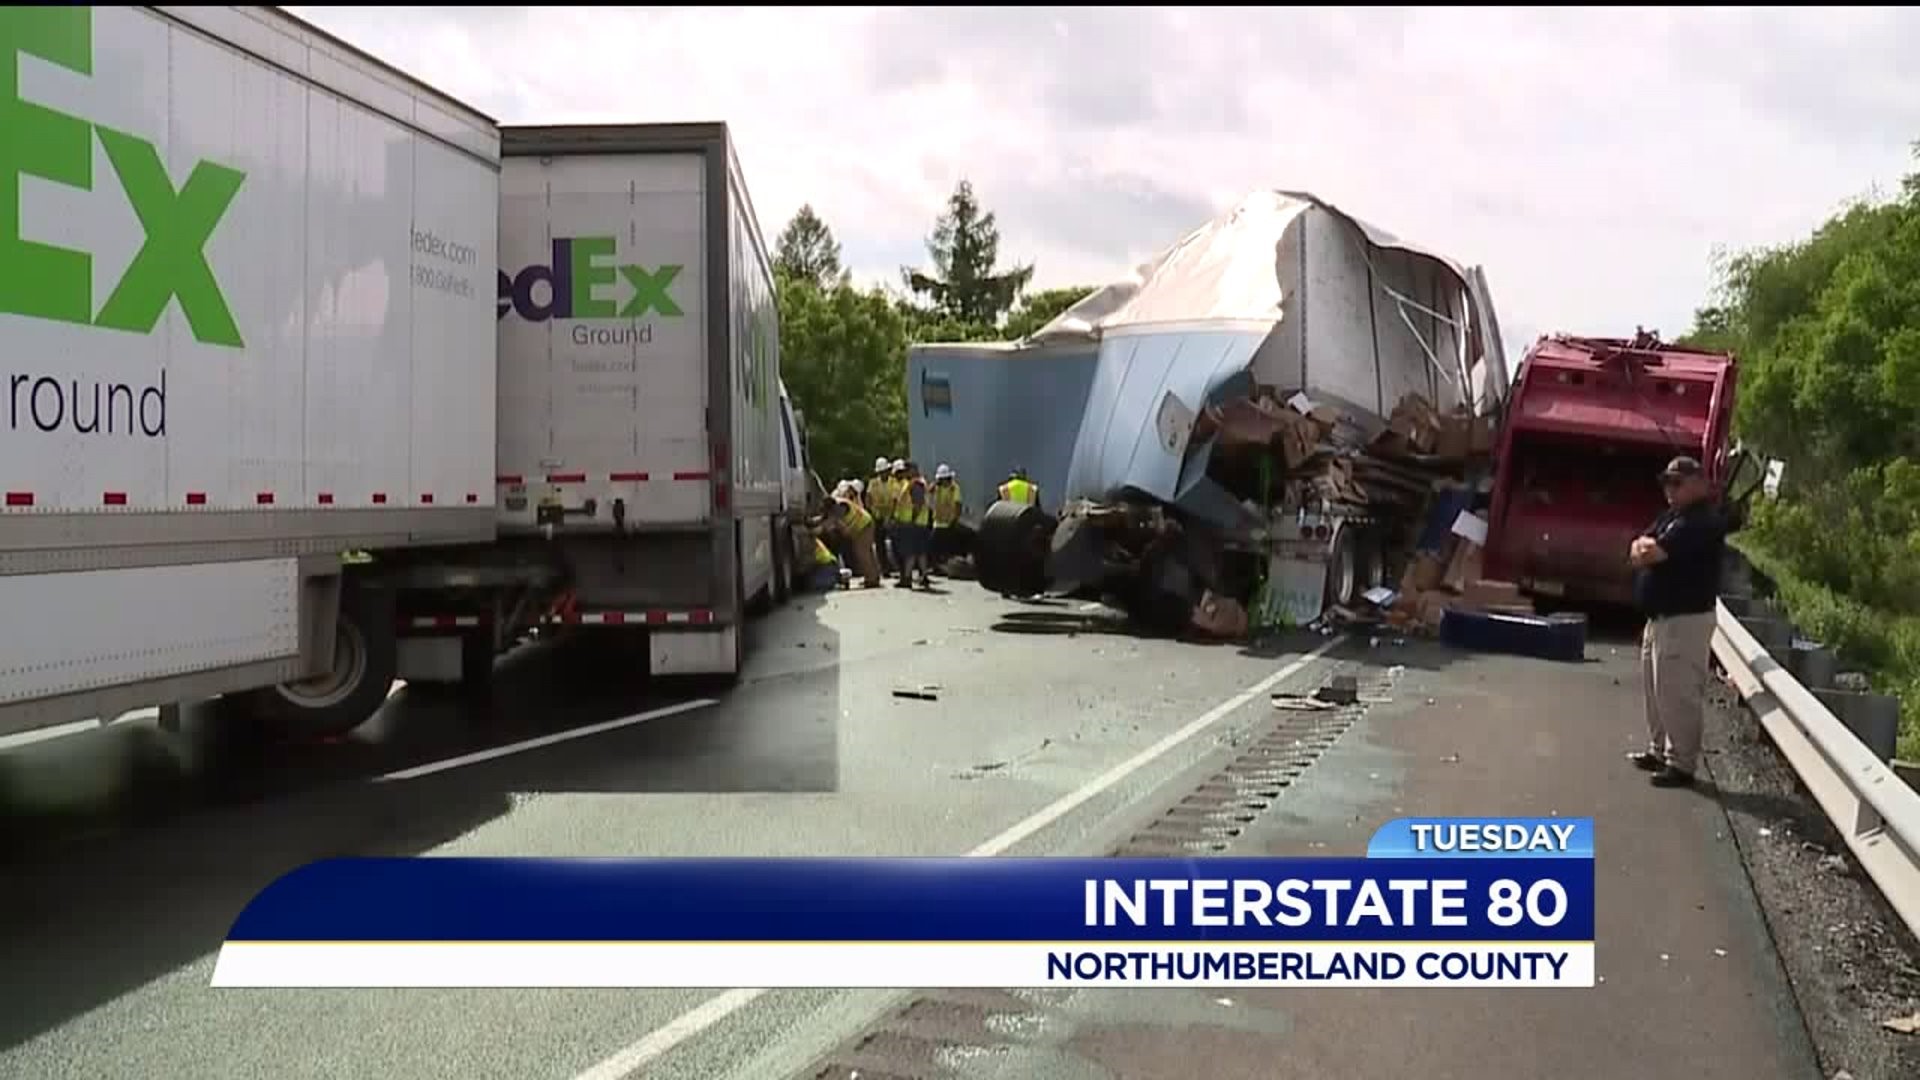 Second Person Dead After Wreck on I-80 in Northumberland County